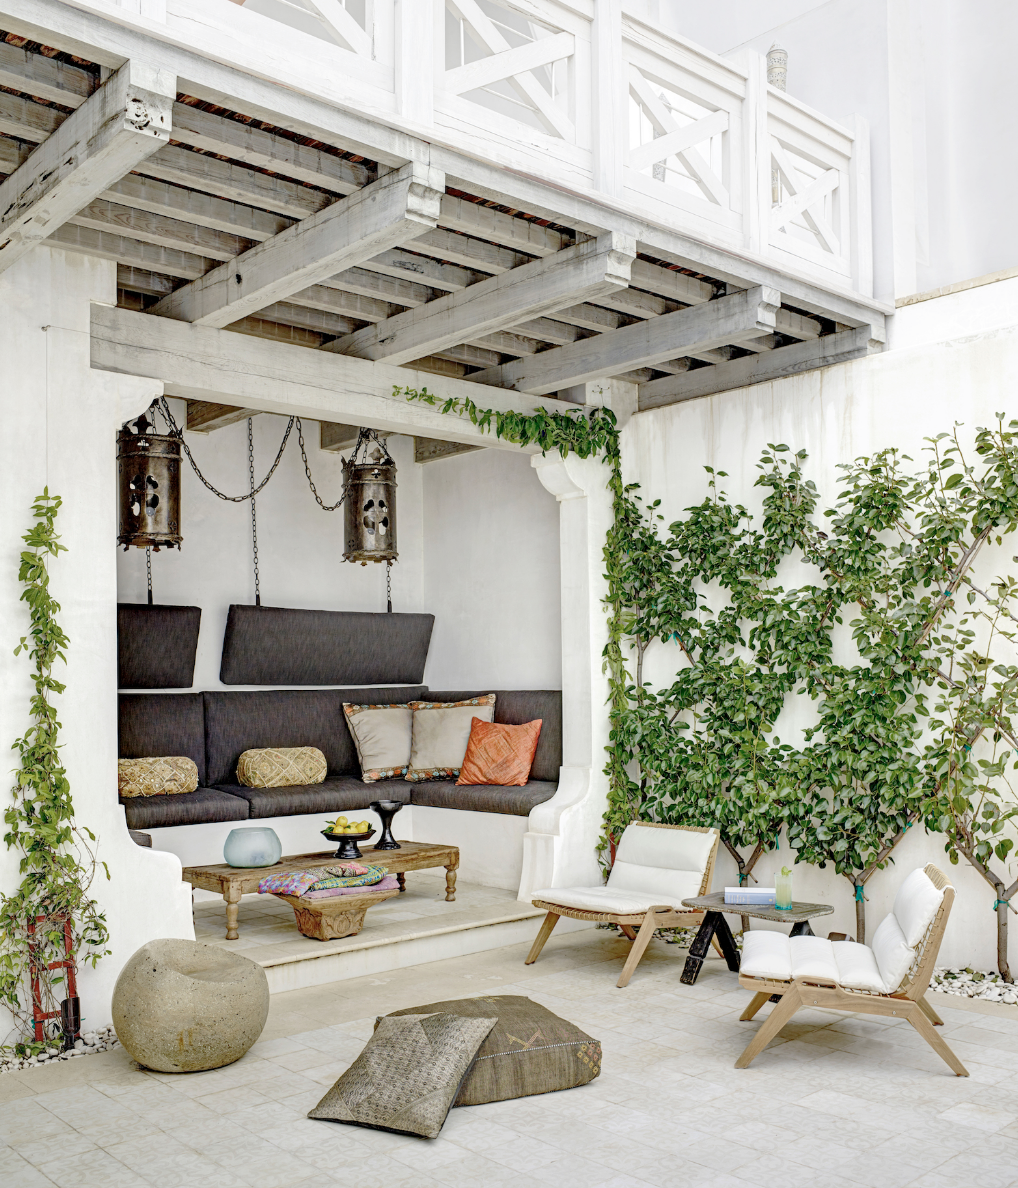 INSPIRATION FOR AN  OUTDOOR SUMMER SPACE!